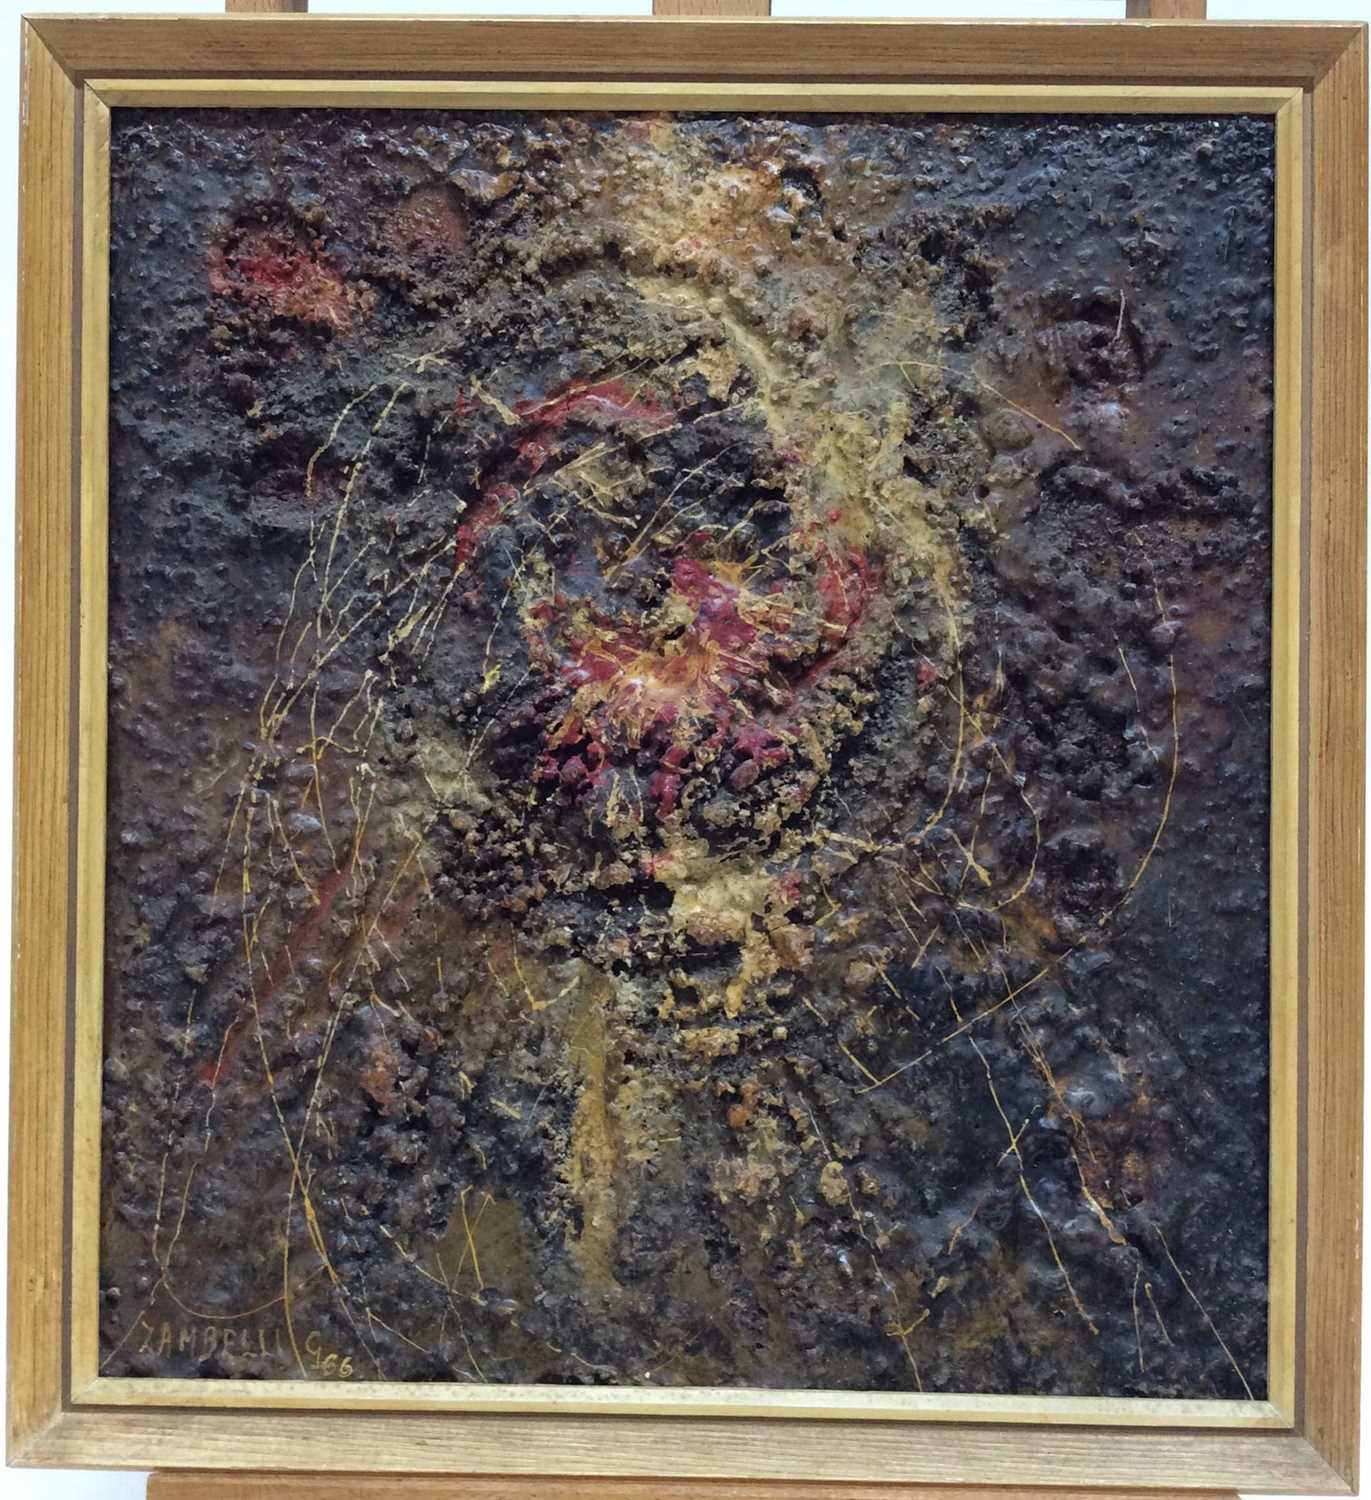 Lot 47 - Zambelli, 1960s mixed media on board - Abstract, signed and dated '66, framed, 37cm x 33cm